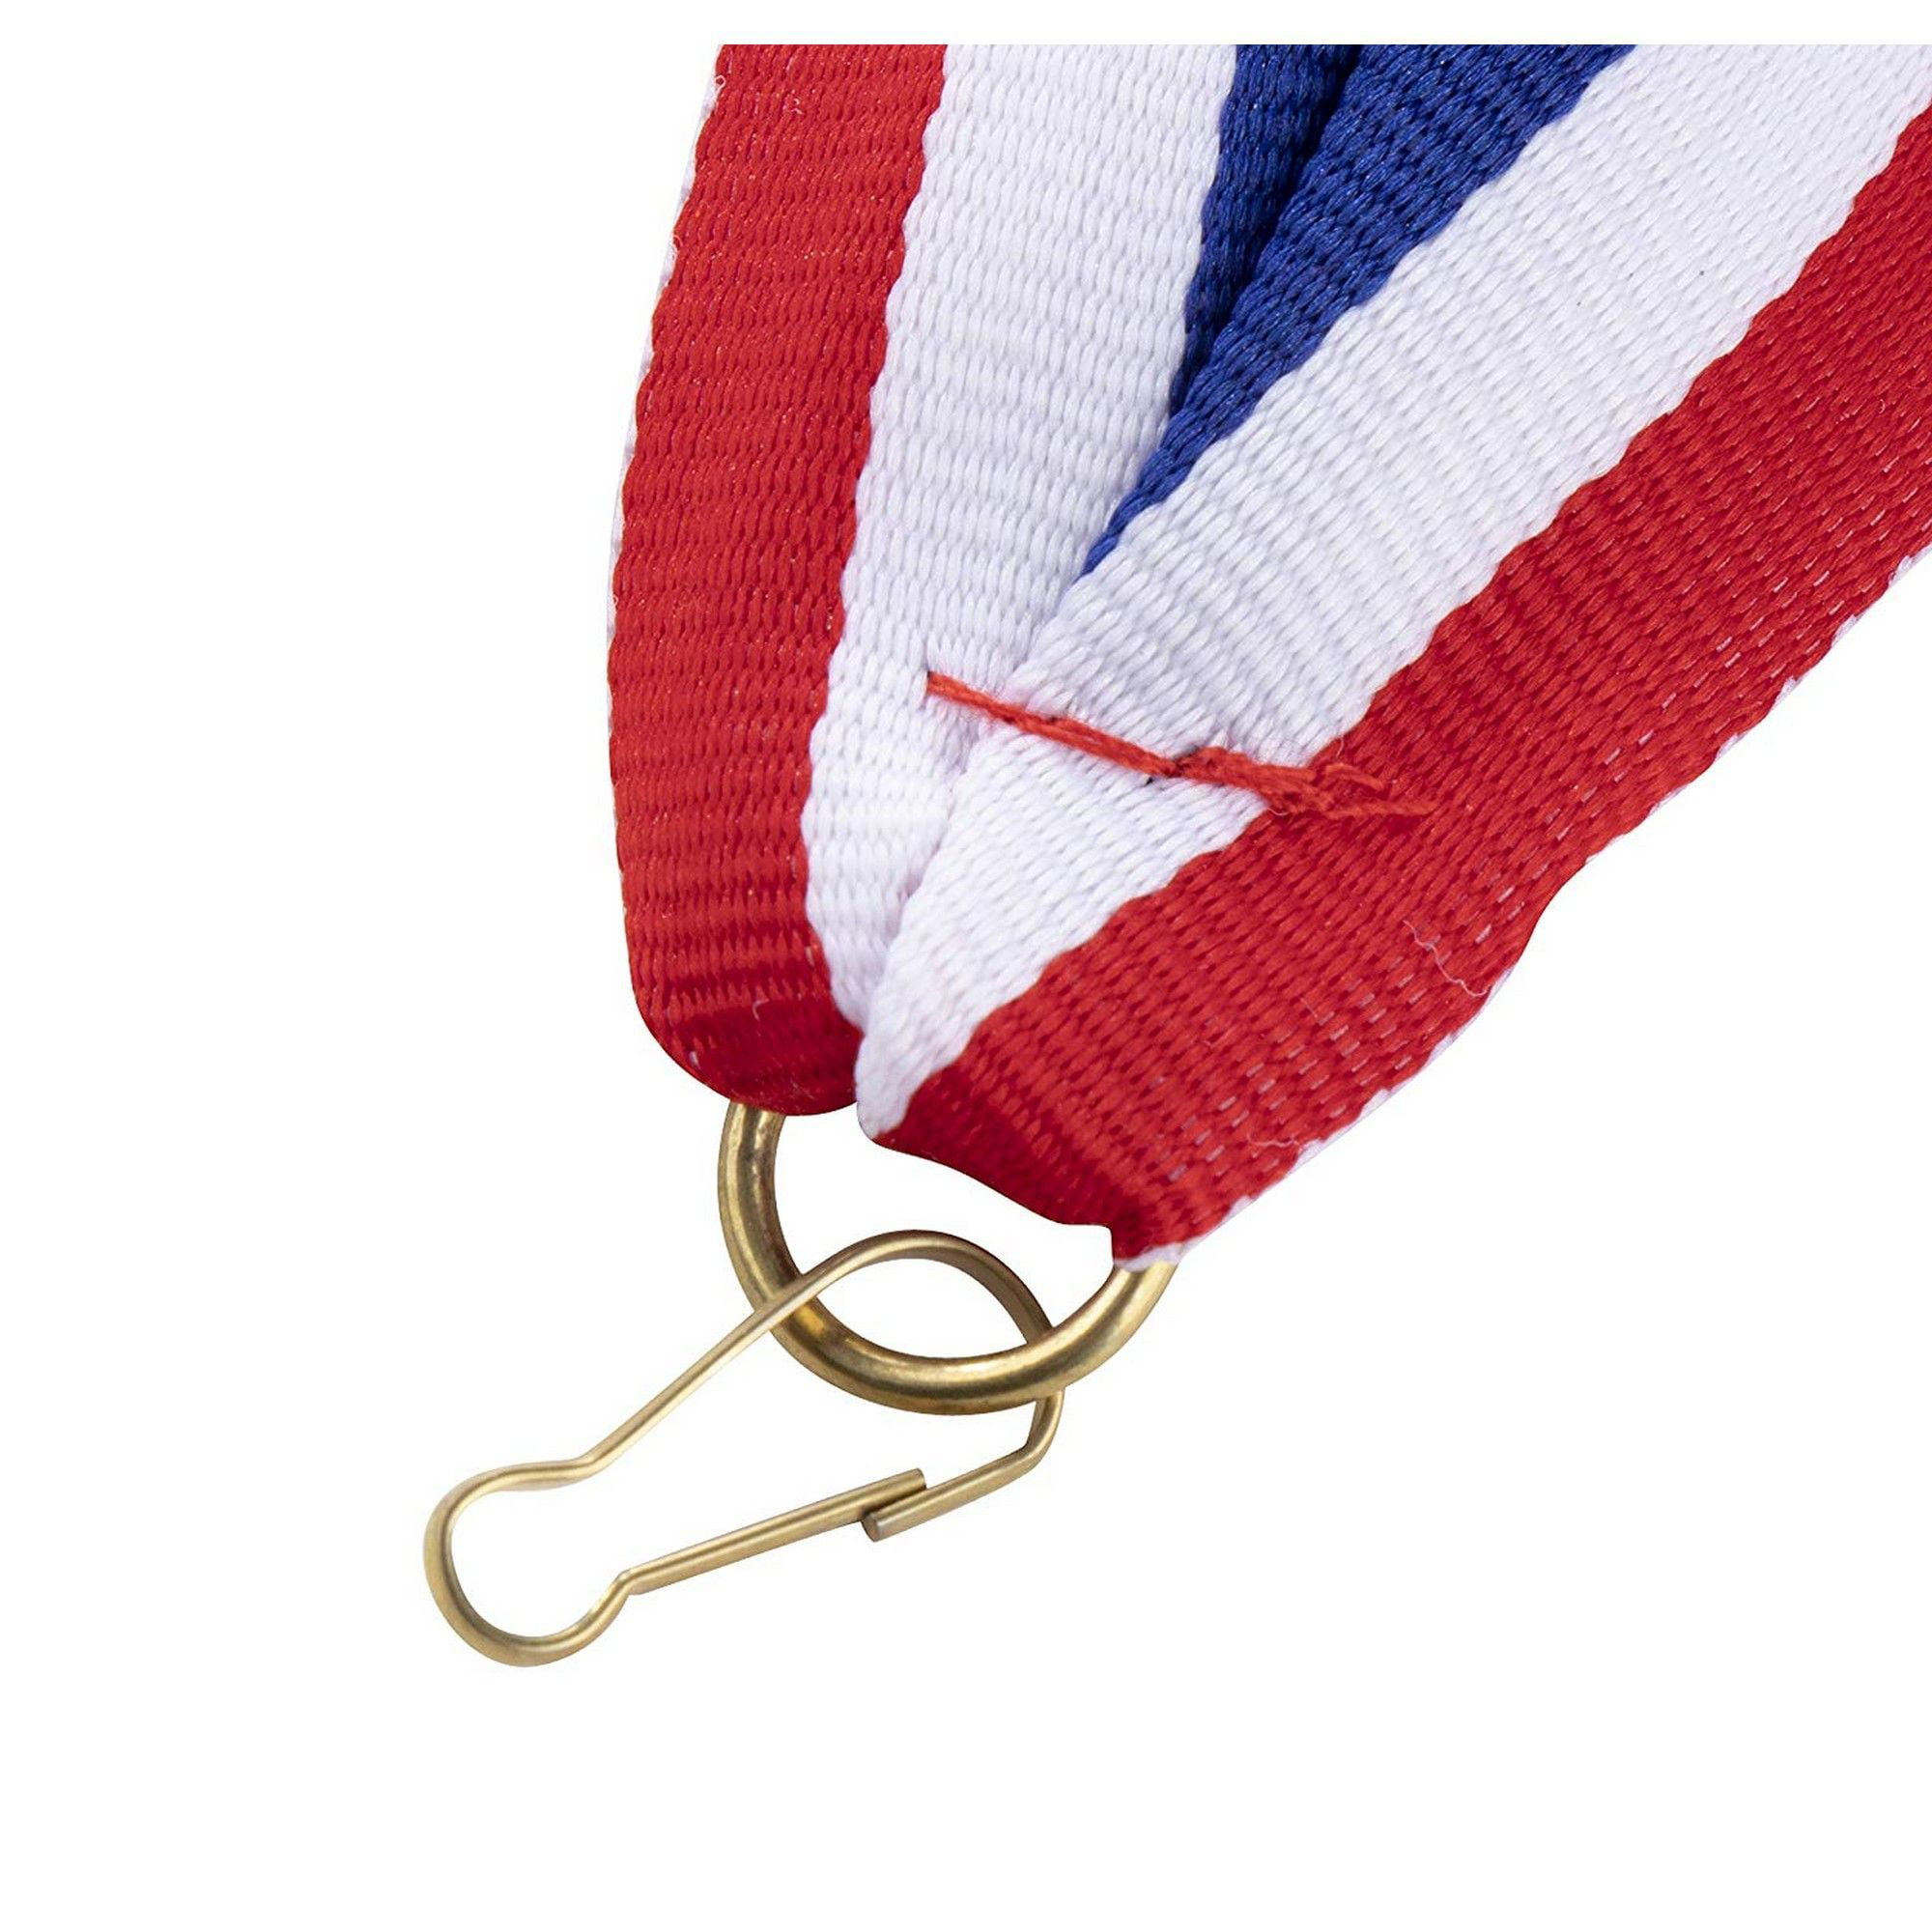 Pack of 10 Black and Gray Neck Ribbons for Medals with Snap Clips Flat Lanyard Award 